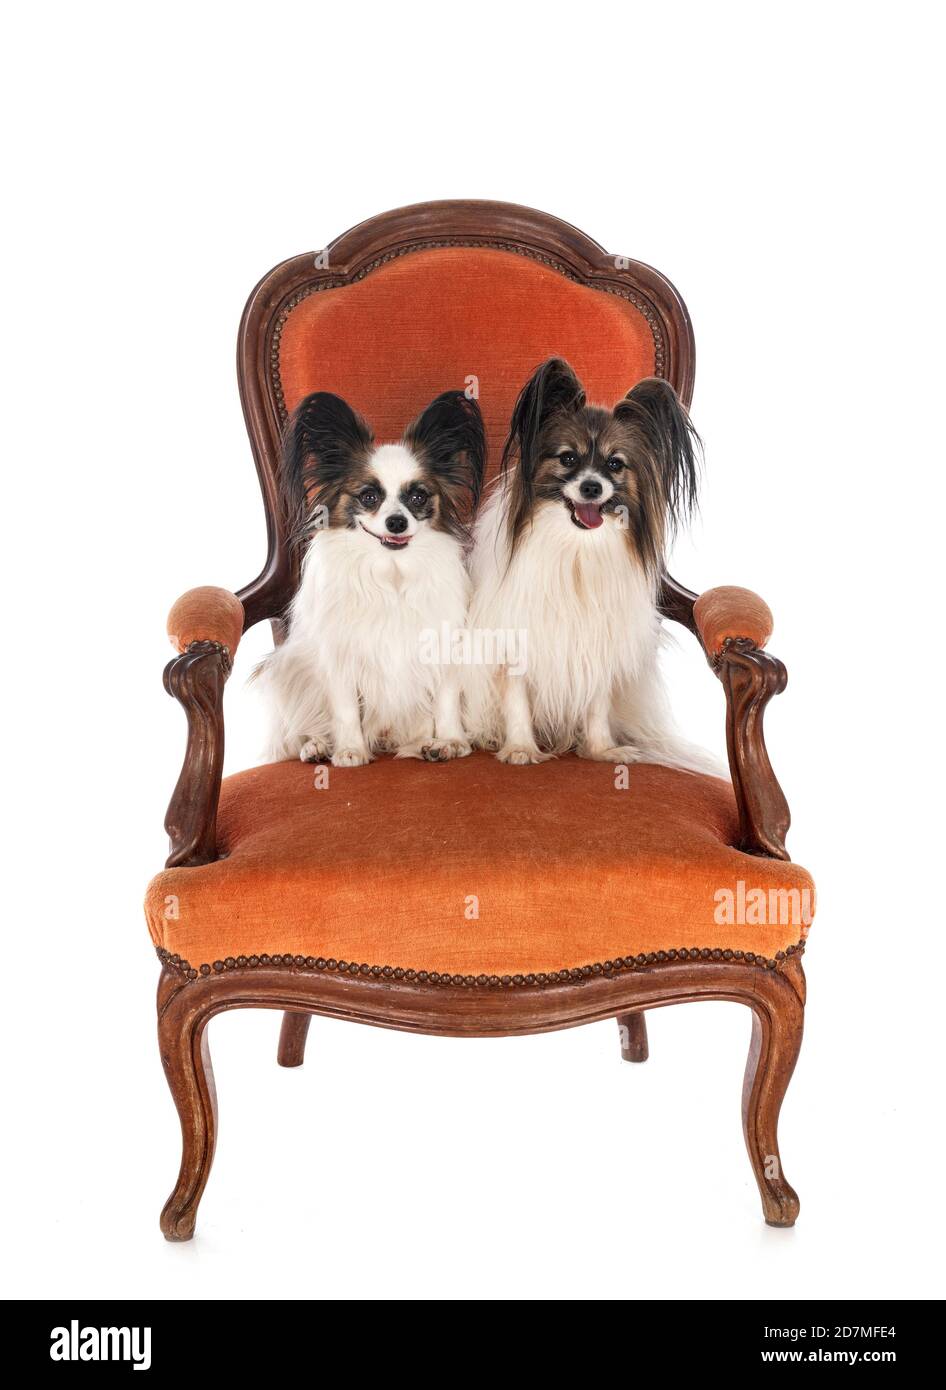 little dogs on chair in front of white background Stock Photo